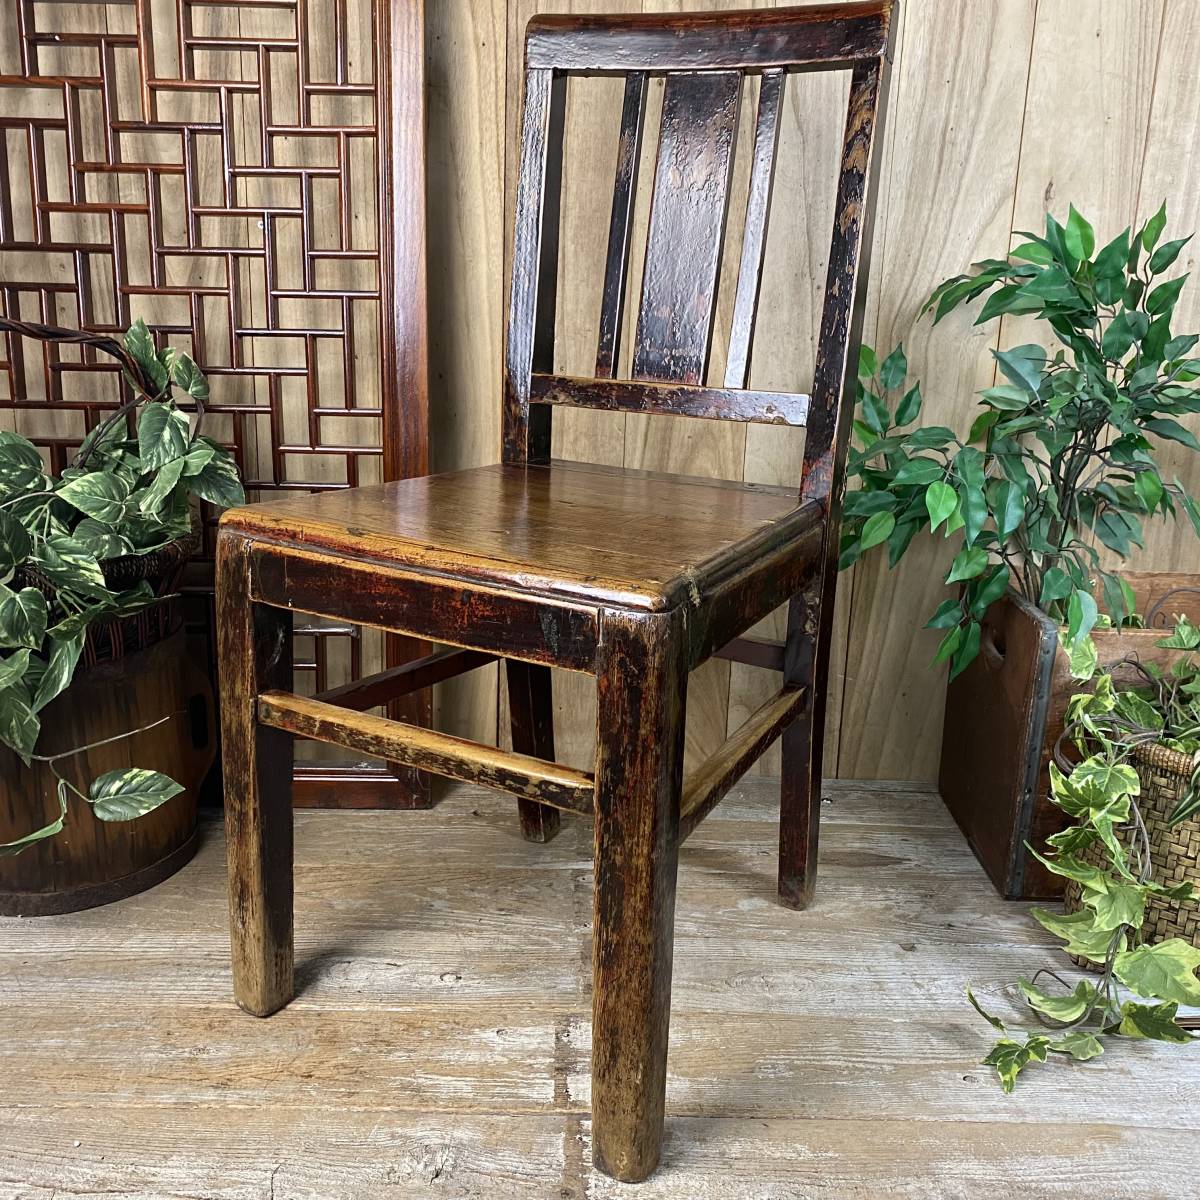  free shipping China antique wood chair ①, wooden, man front interior, period thing chair chair, decoration pcs, stand for flower vase, Joseon Dynasty design Vintage in dust real 